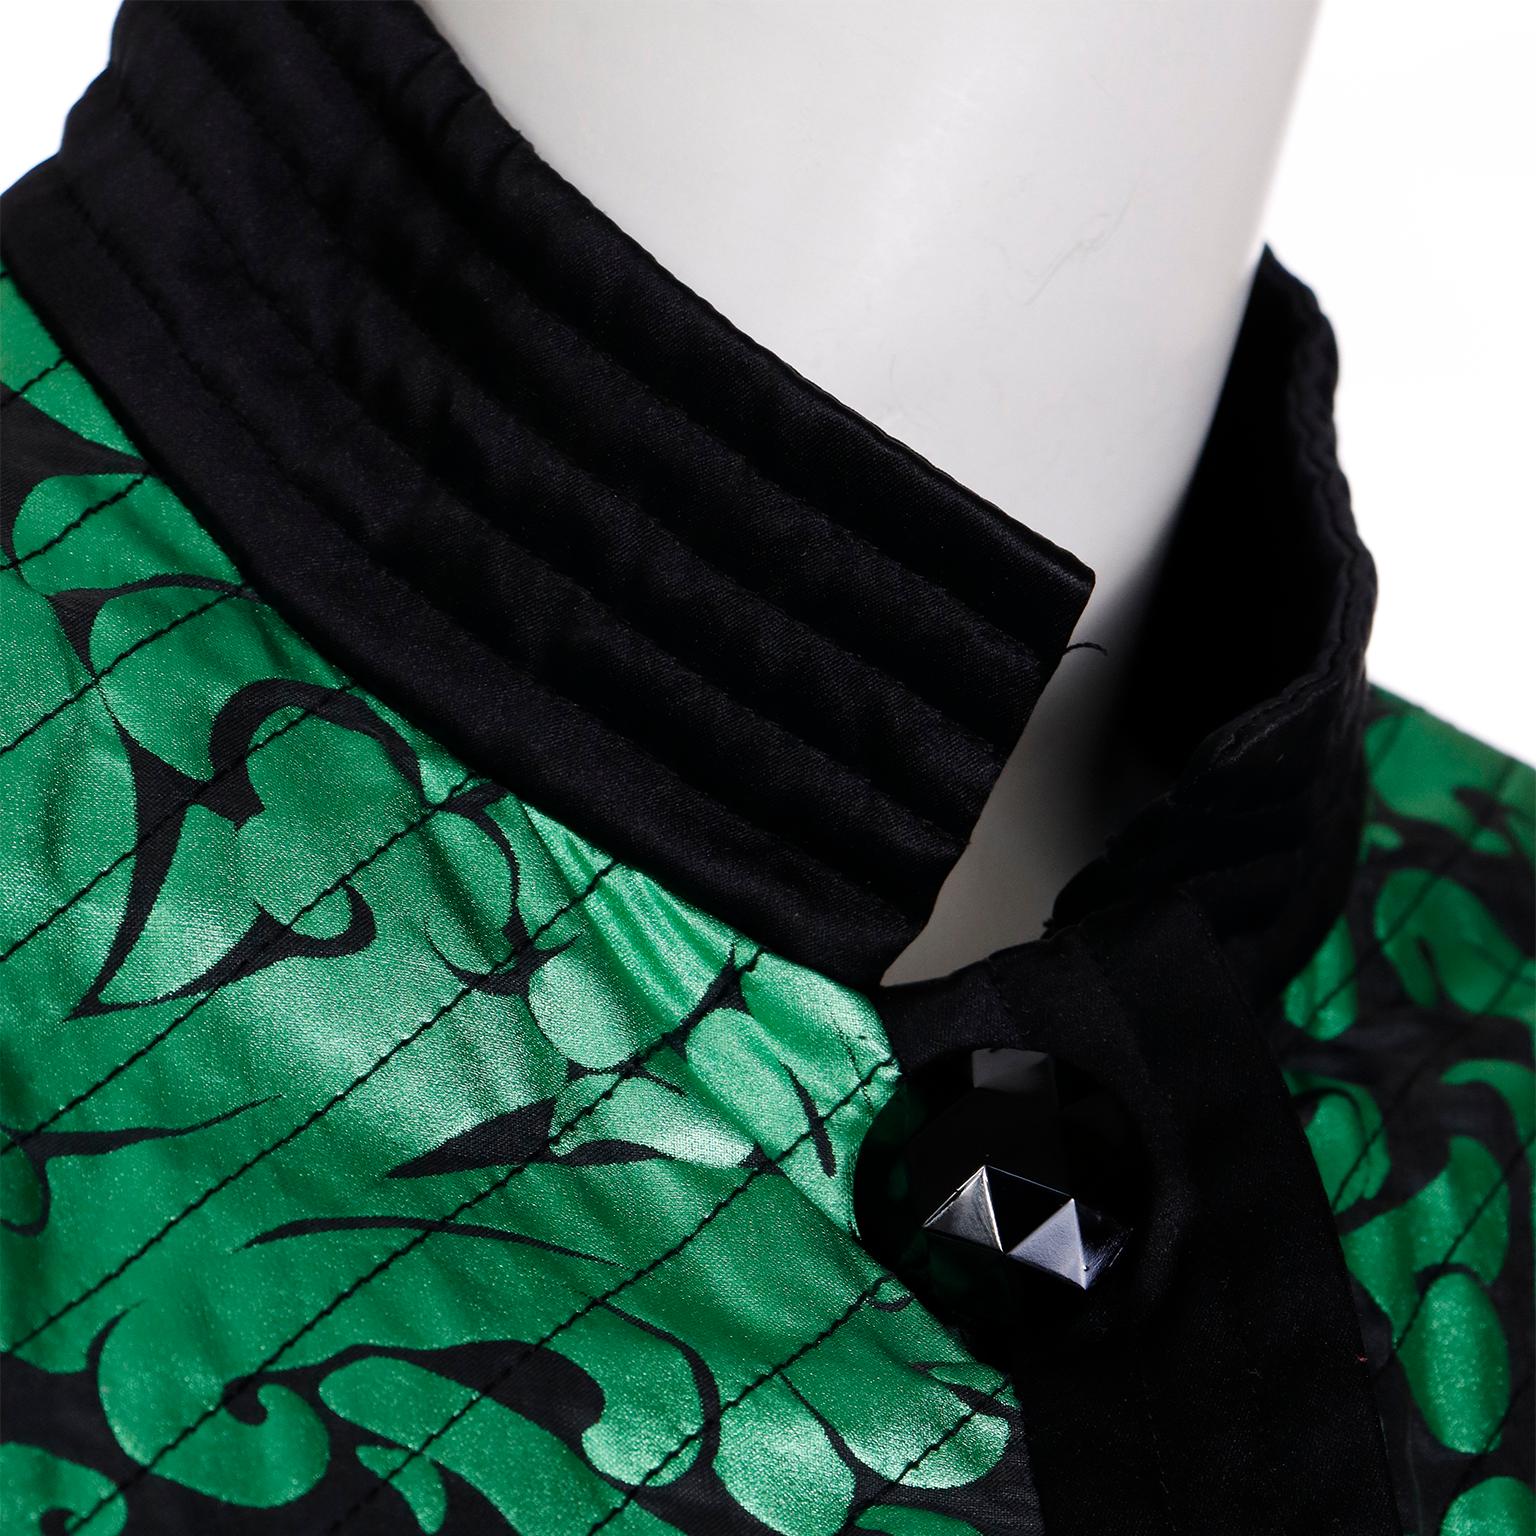 Yves Saint Laurent F/W 1986 / 87 Green Lame Jacket with Quilted Black Satin Trim 4